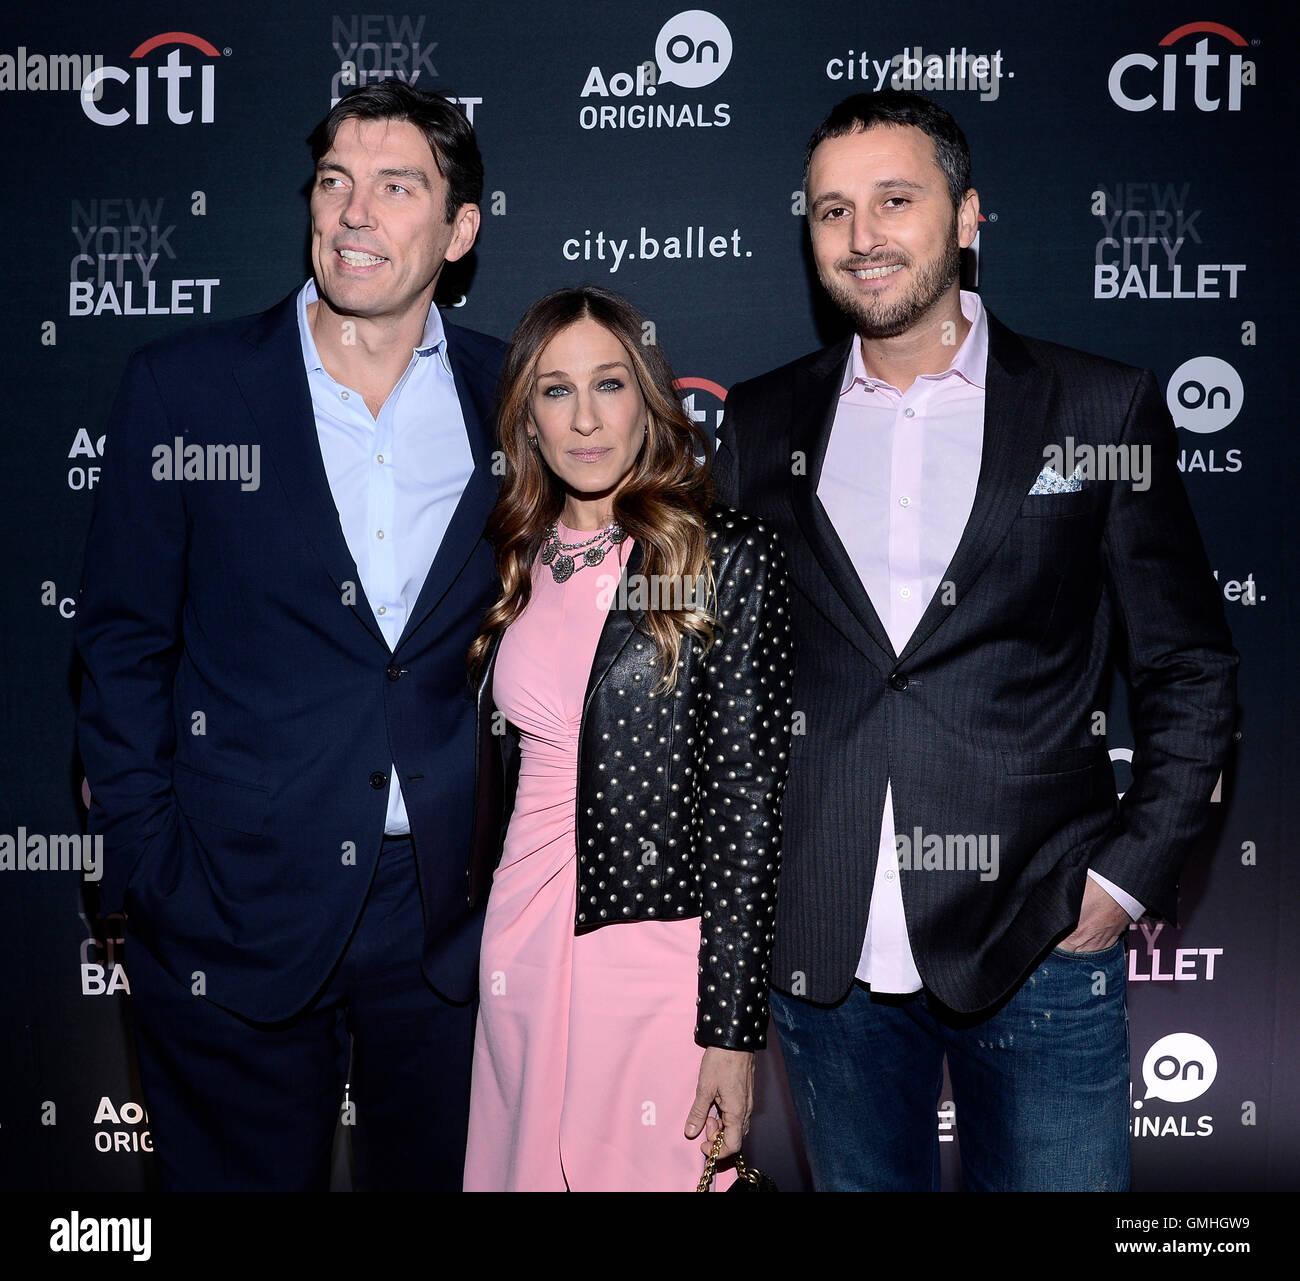 NEW YORK, NY - NOVEMBER 4:  (L-R) Chairman & CEO of AOL, Tim Armstrong, executive producer and series narrator, Sarah Jessica Parker and SVP of AOL On, Ran Harnevo  pictured at the Premiere of The New AOL ON Original Series city.ballet. at the Tribeca Cin Stock Photo